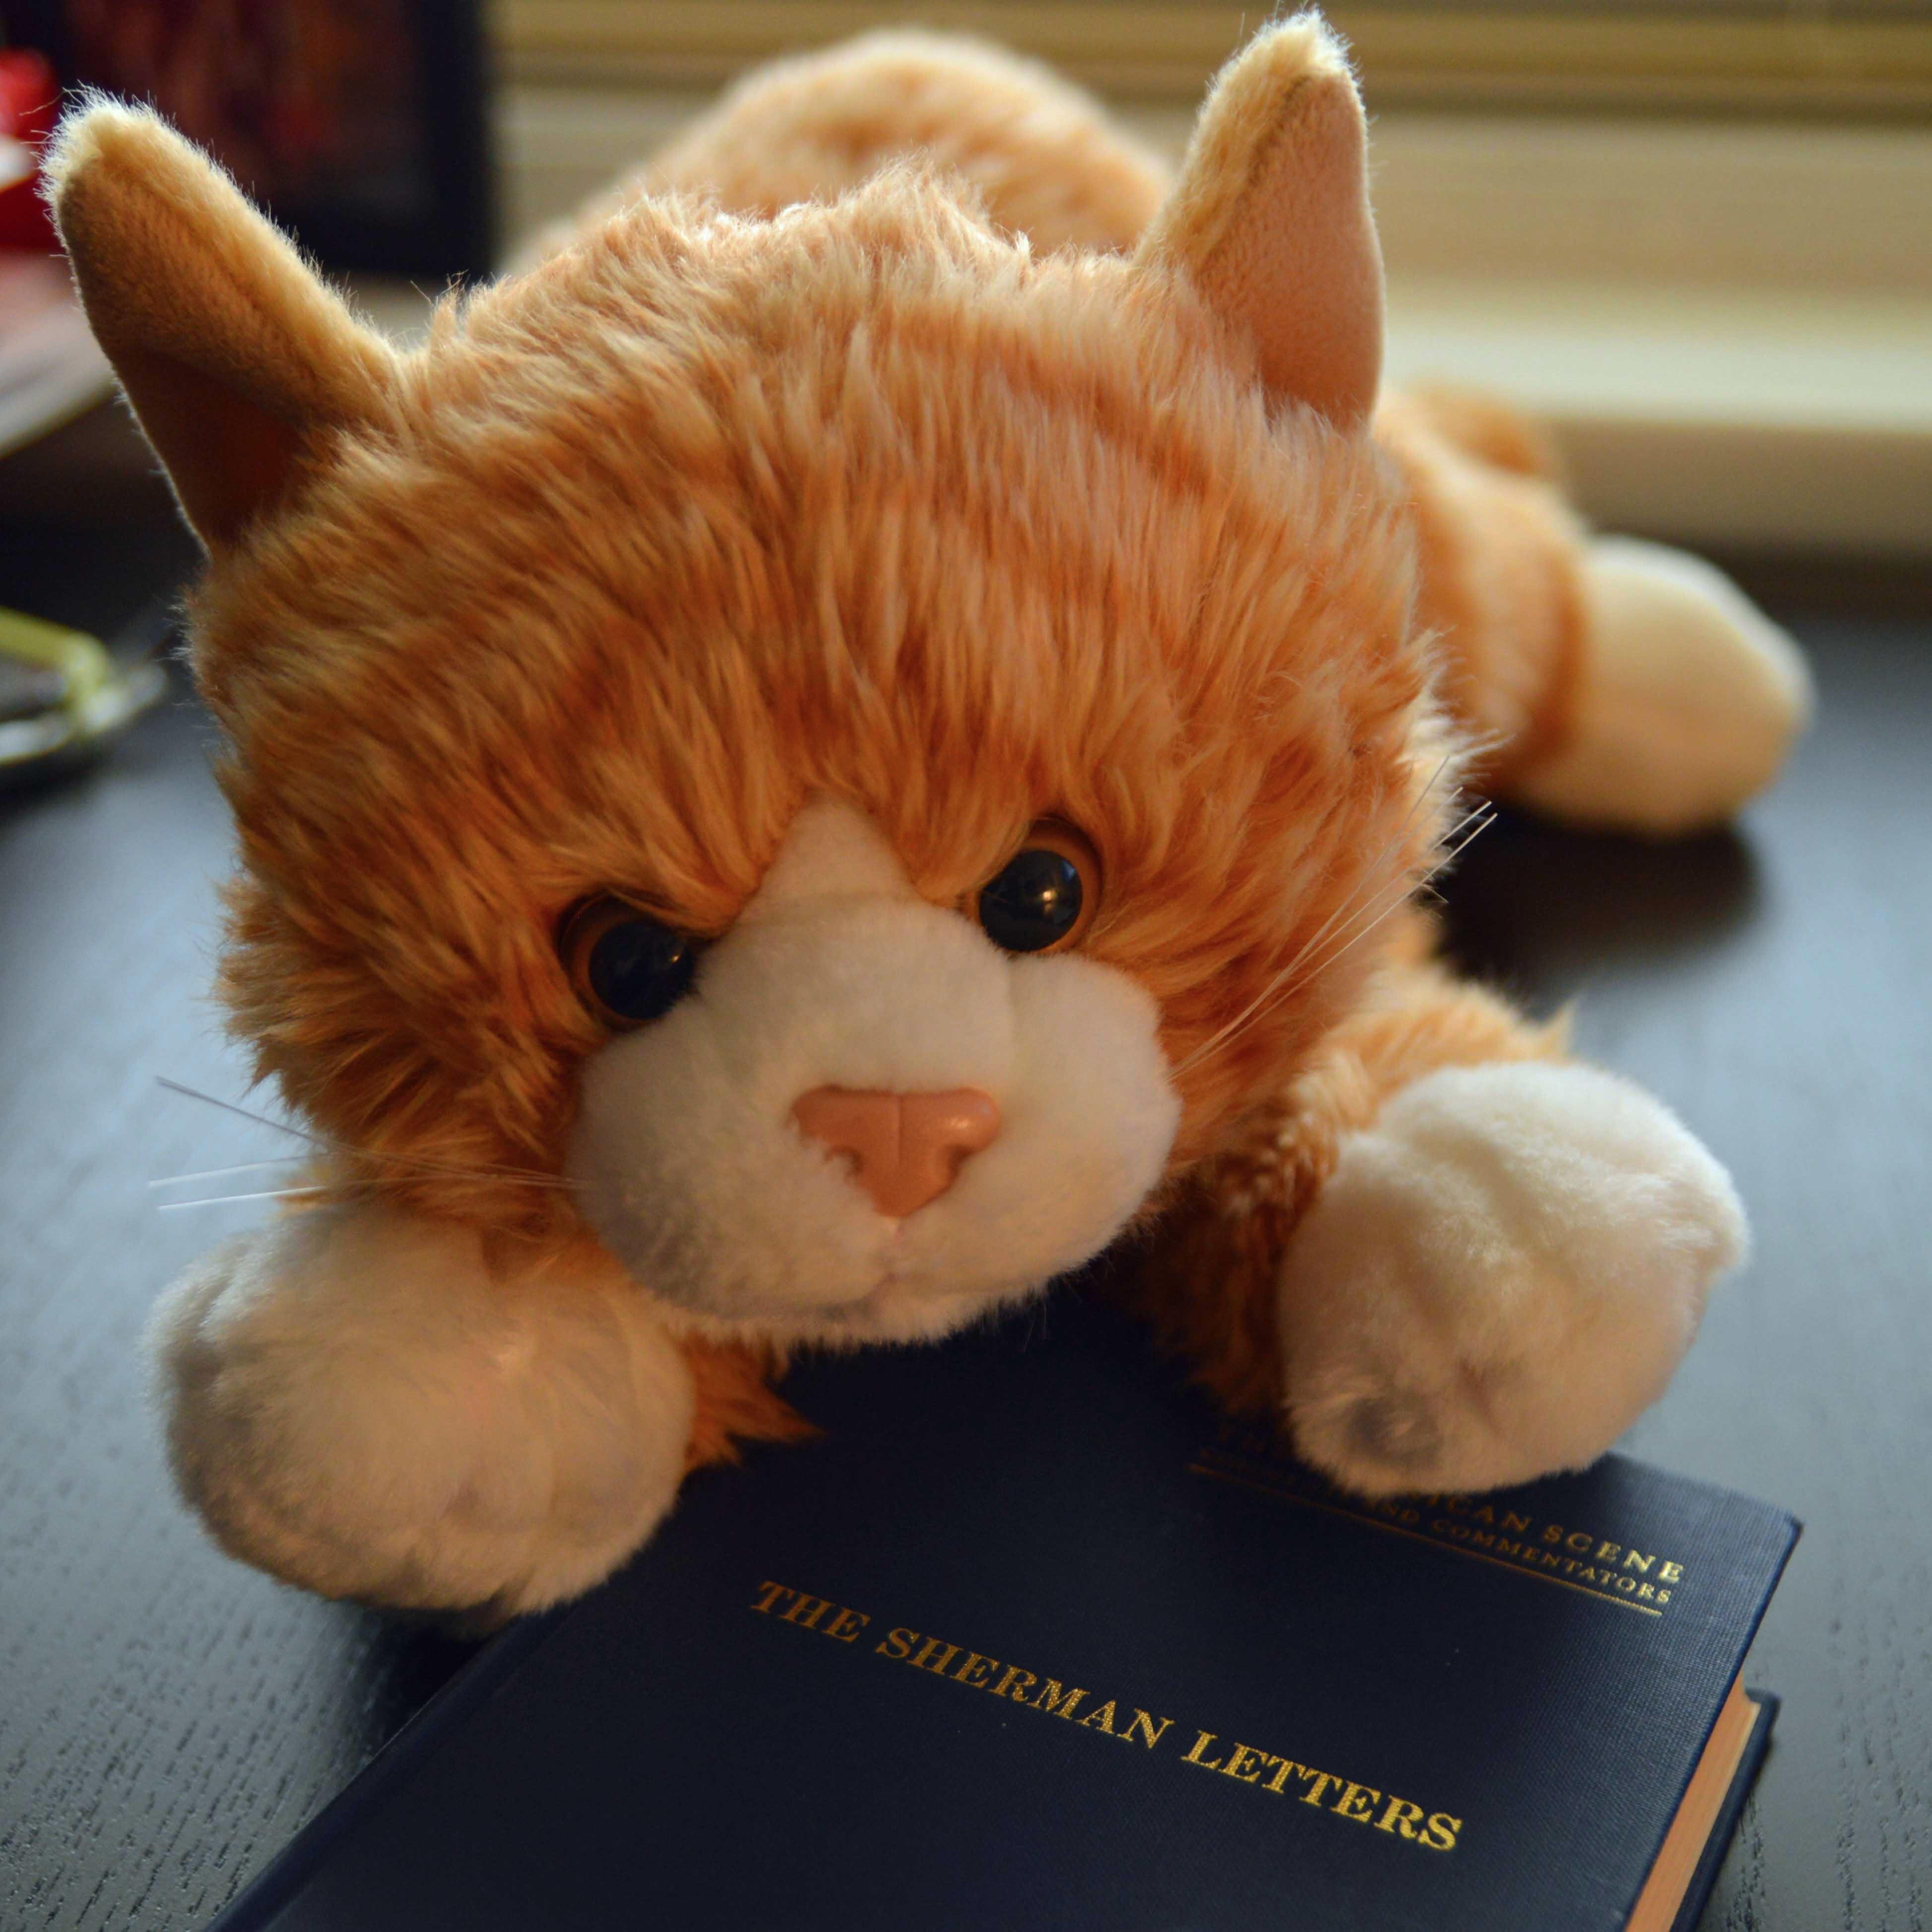 A stuffed cat named Sherman Kitty, after U.S. General William Tecumseh Sherman. With the help of my owner I relive his life & adventures. Come along with me!